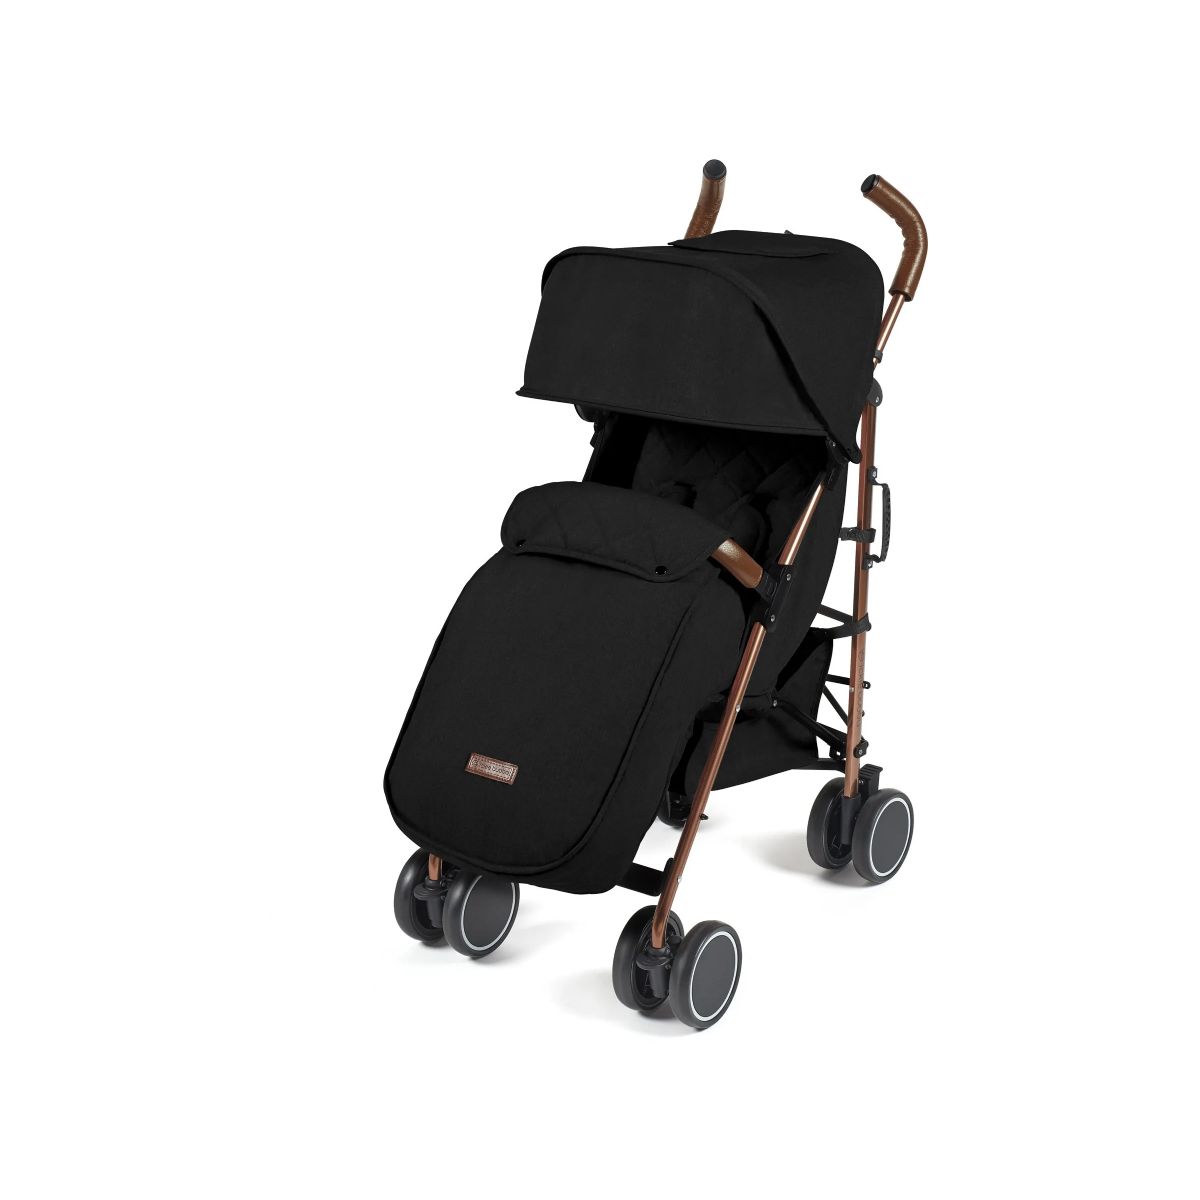 https://www.kiddies-kingdom.com/201947-thickbox_default/ickle-bubba-discovery-max-rose-gold-chassis-pushchair-black.jpg